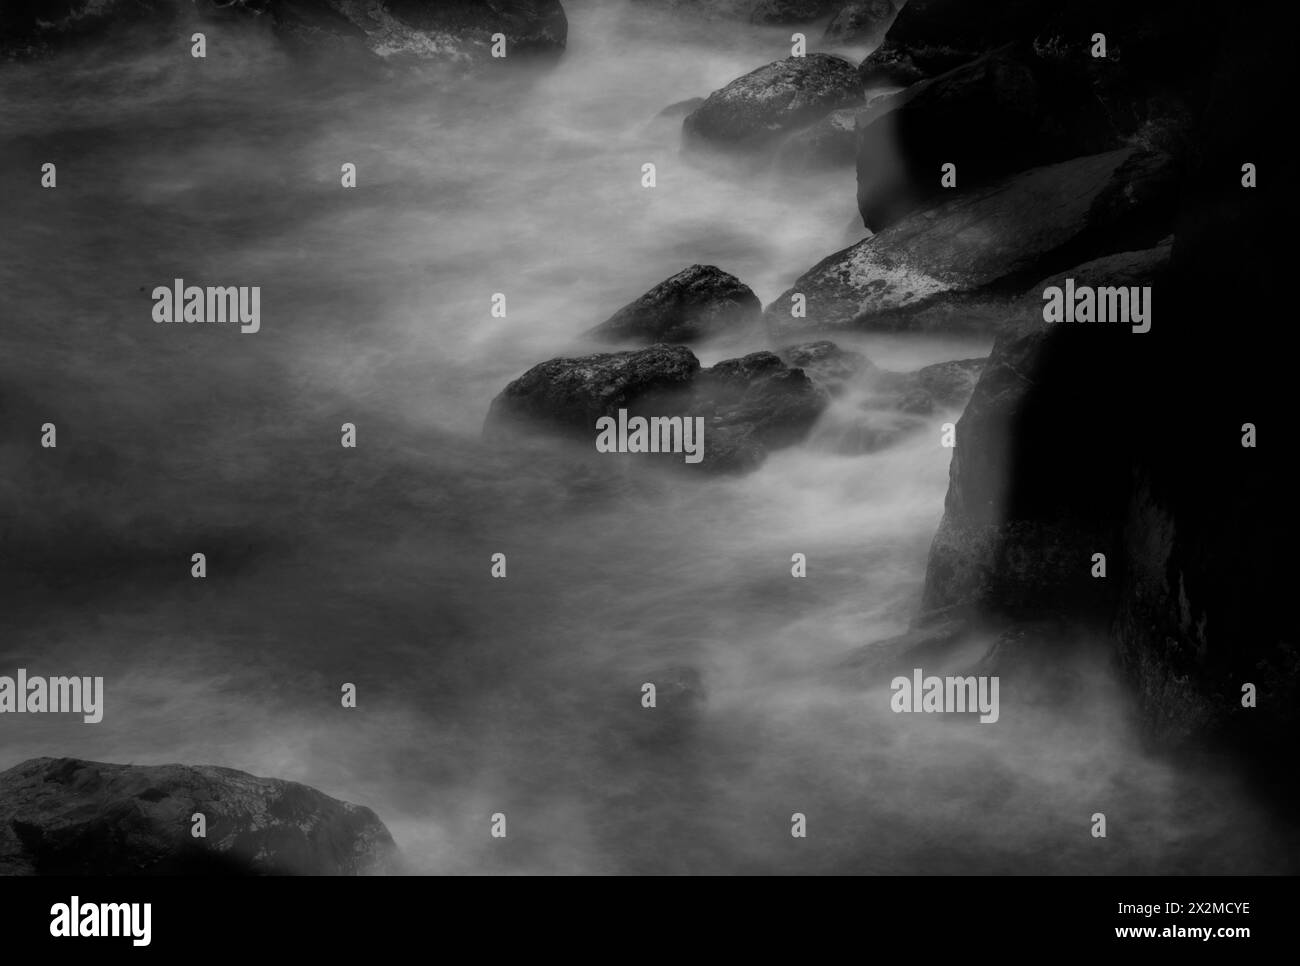 Black and white photography captures the serene motion of mist-like water meandering around coarse rocks. Stock Photo